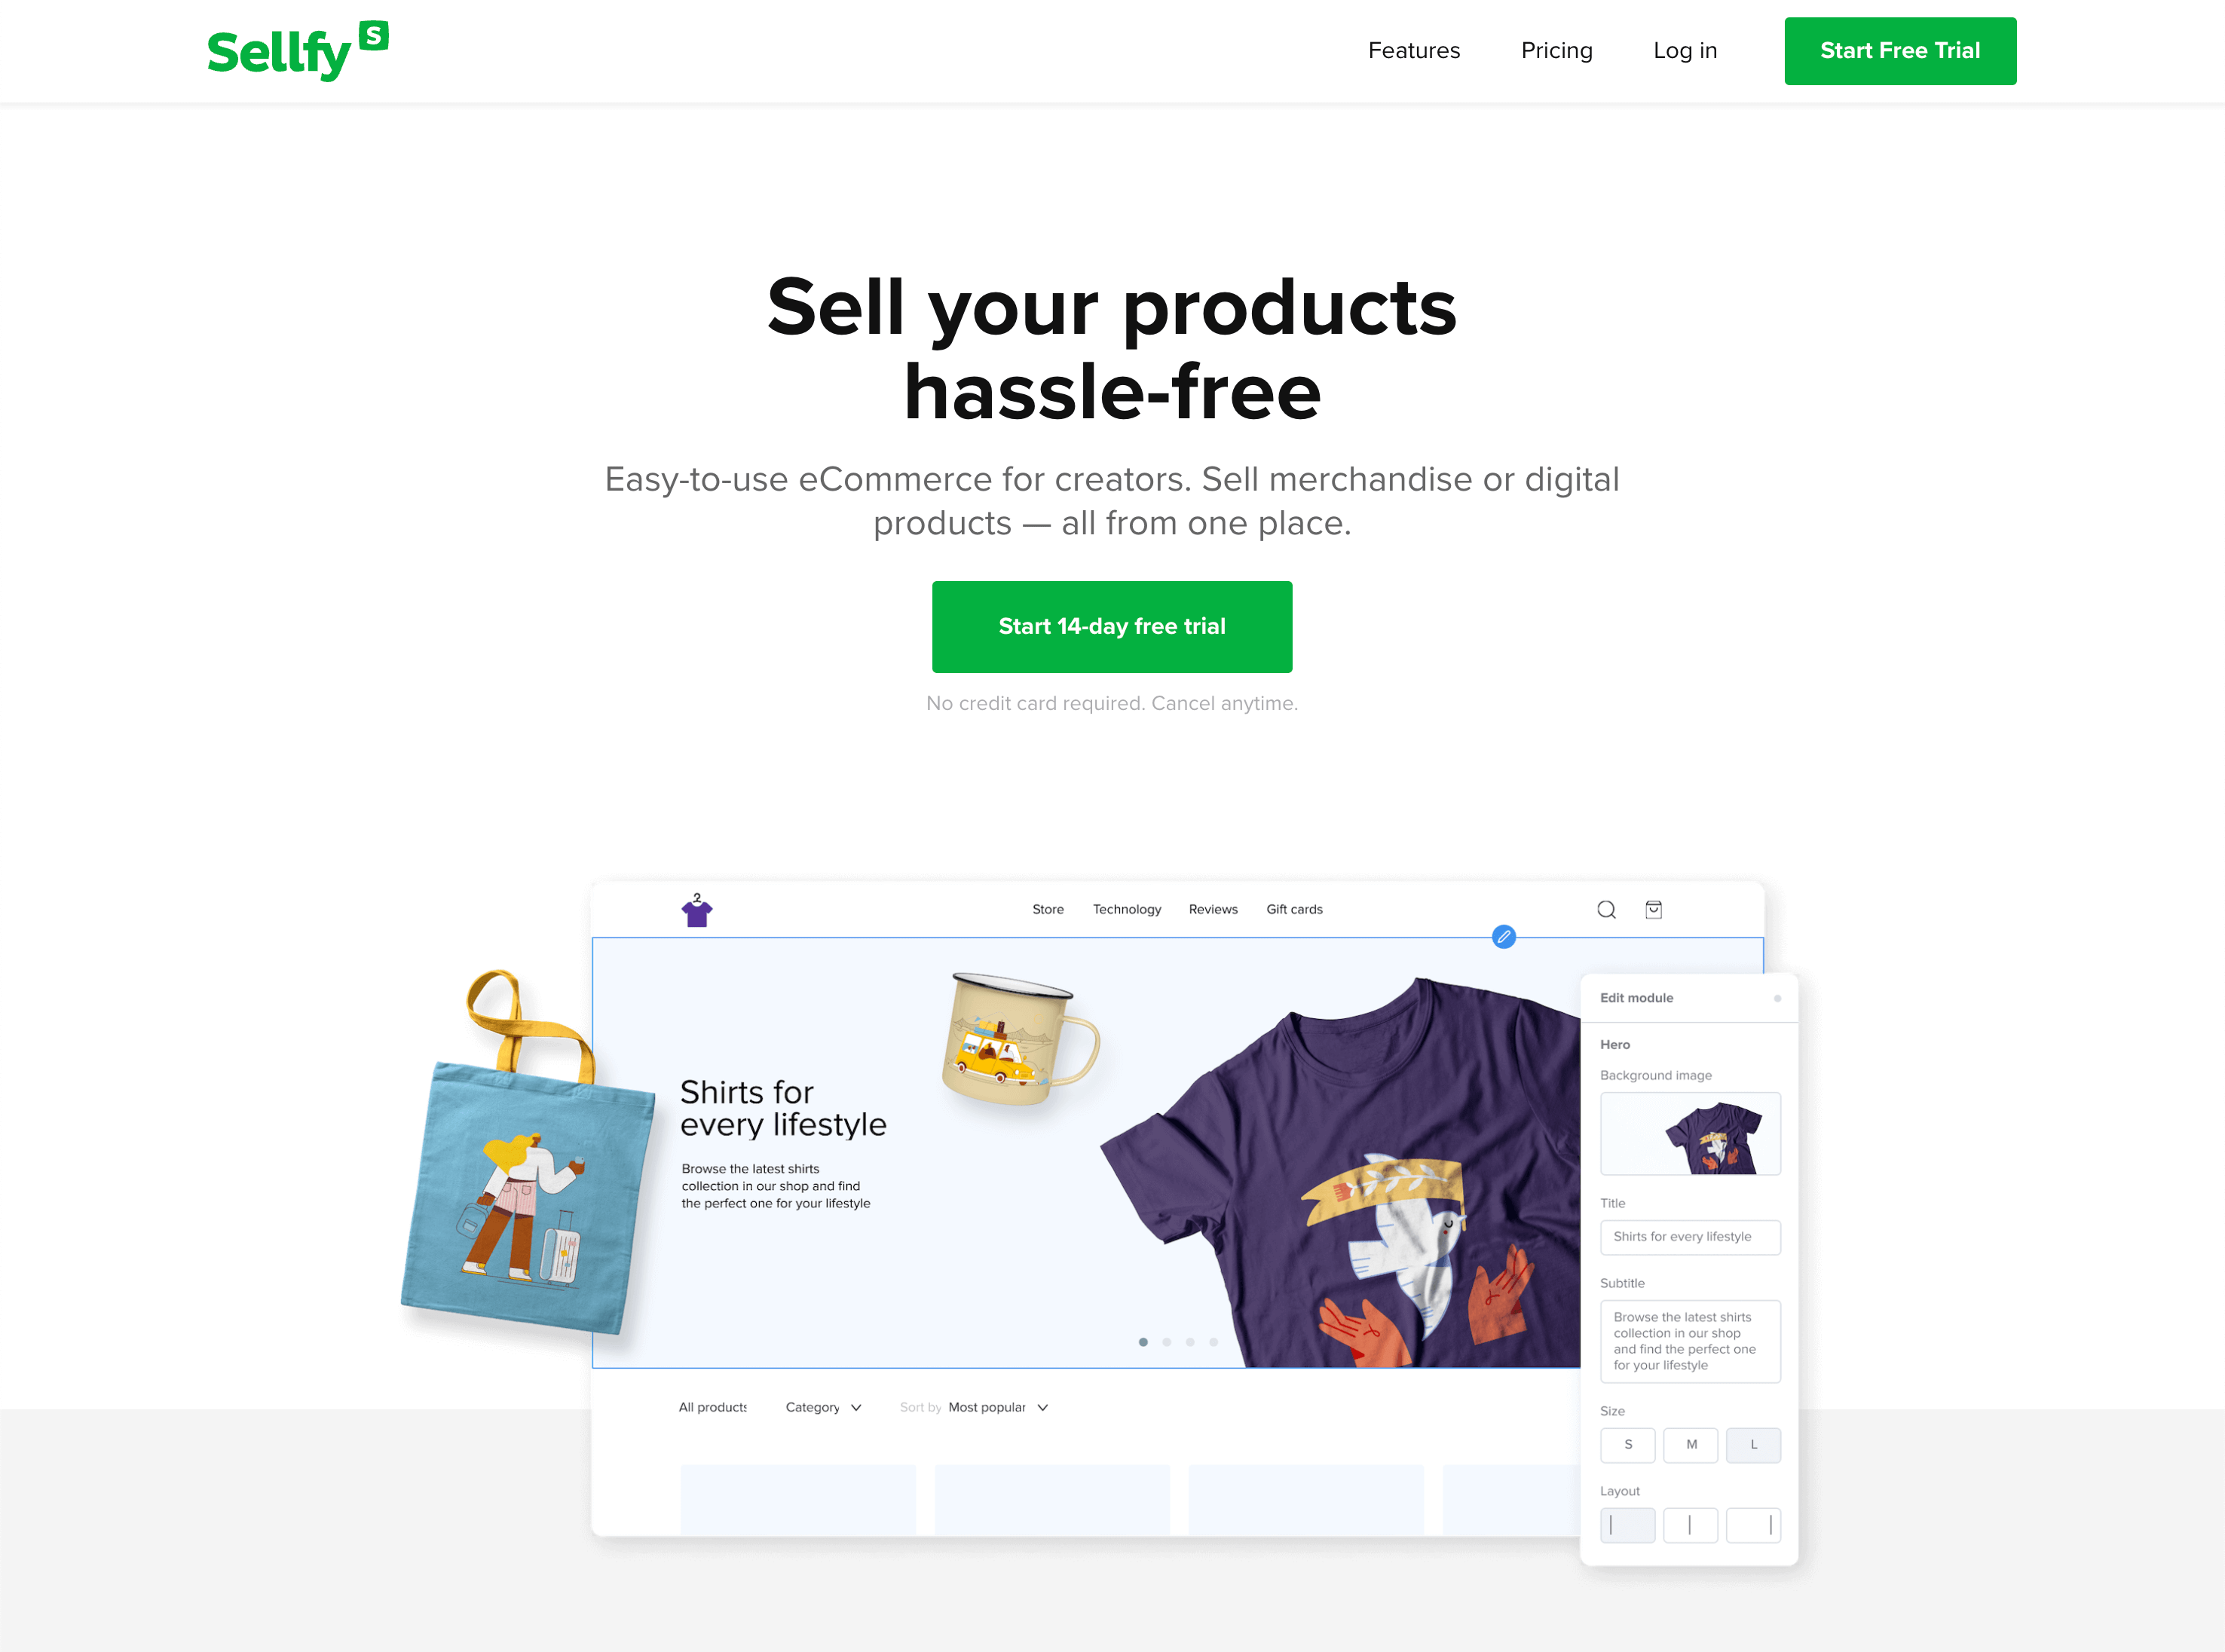 Sellfy's home page